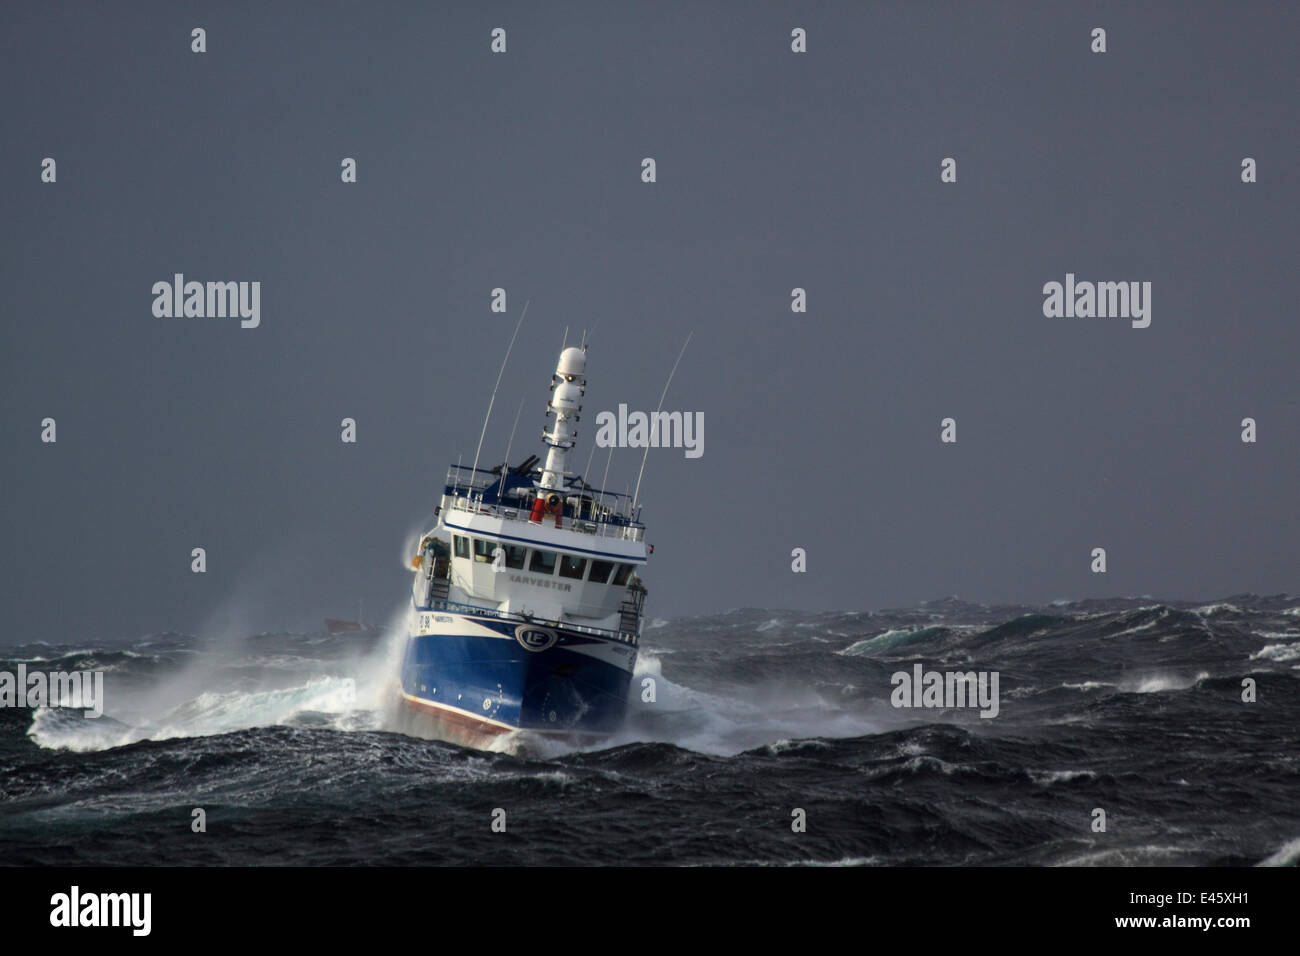 Fishing vessel 'Harvester' heading to North Sea fishing grounds in stormy weather. Europe, November 2010. Property released. Stock Photo